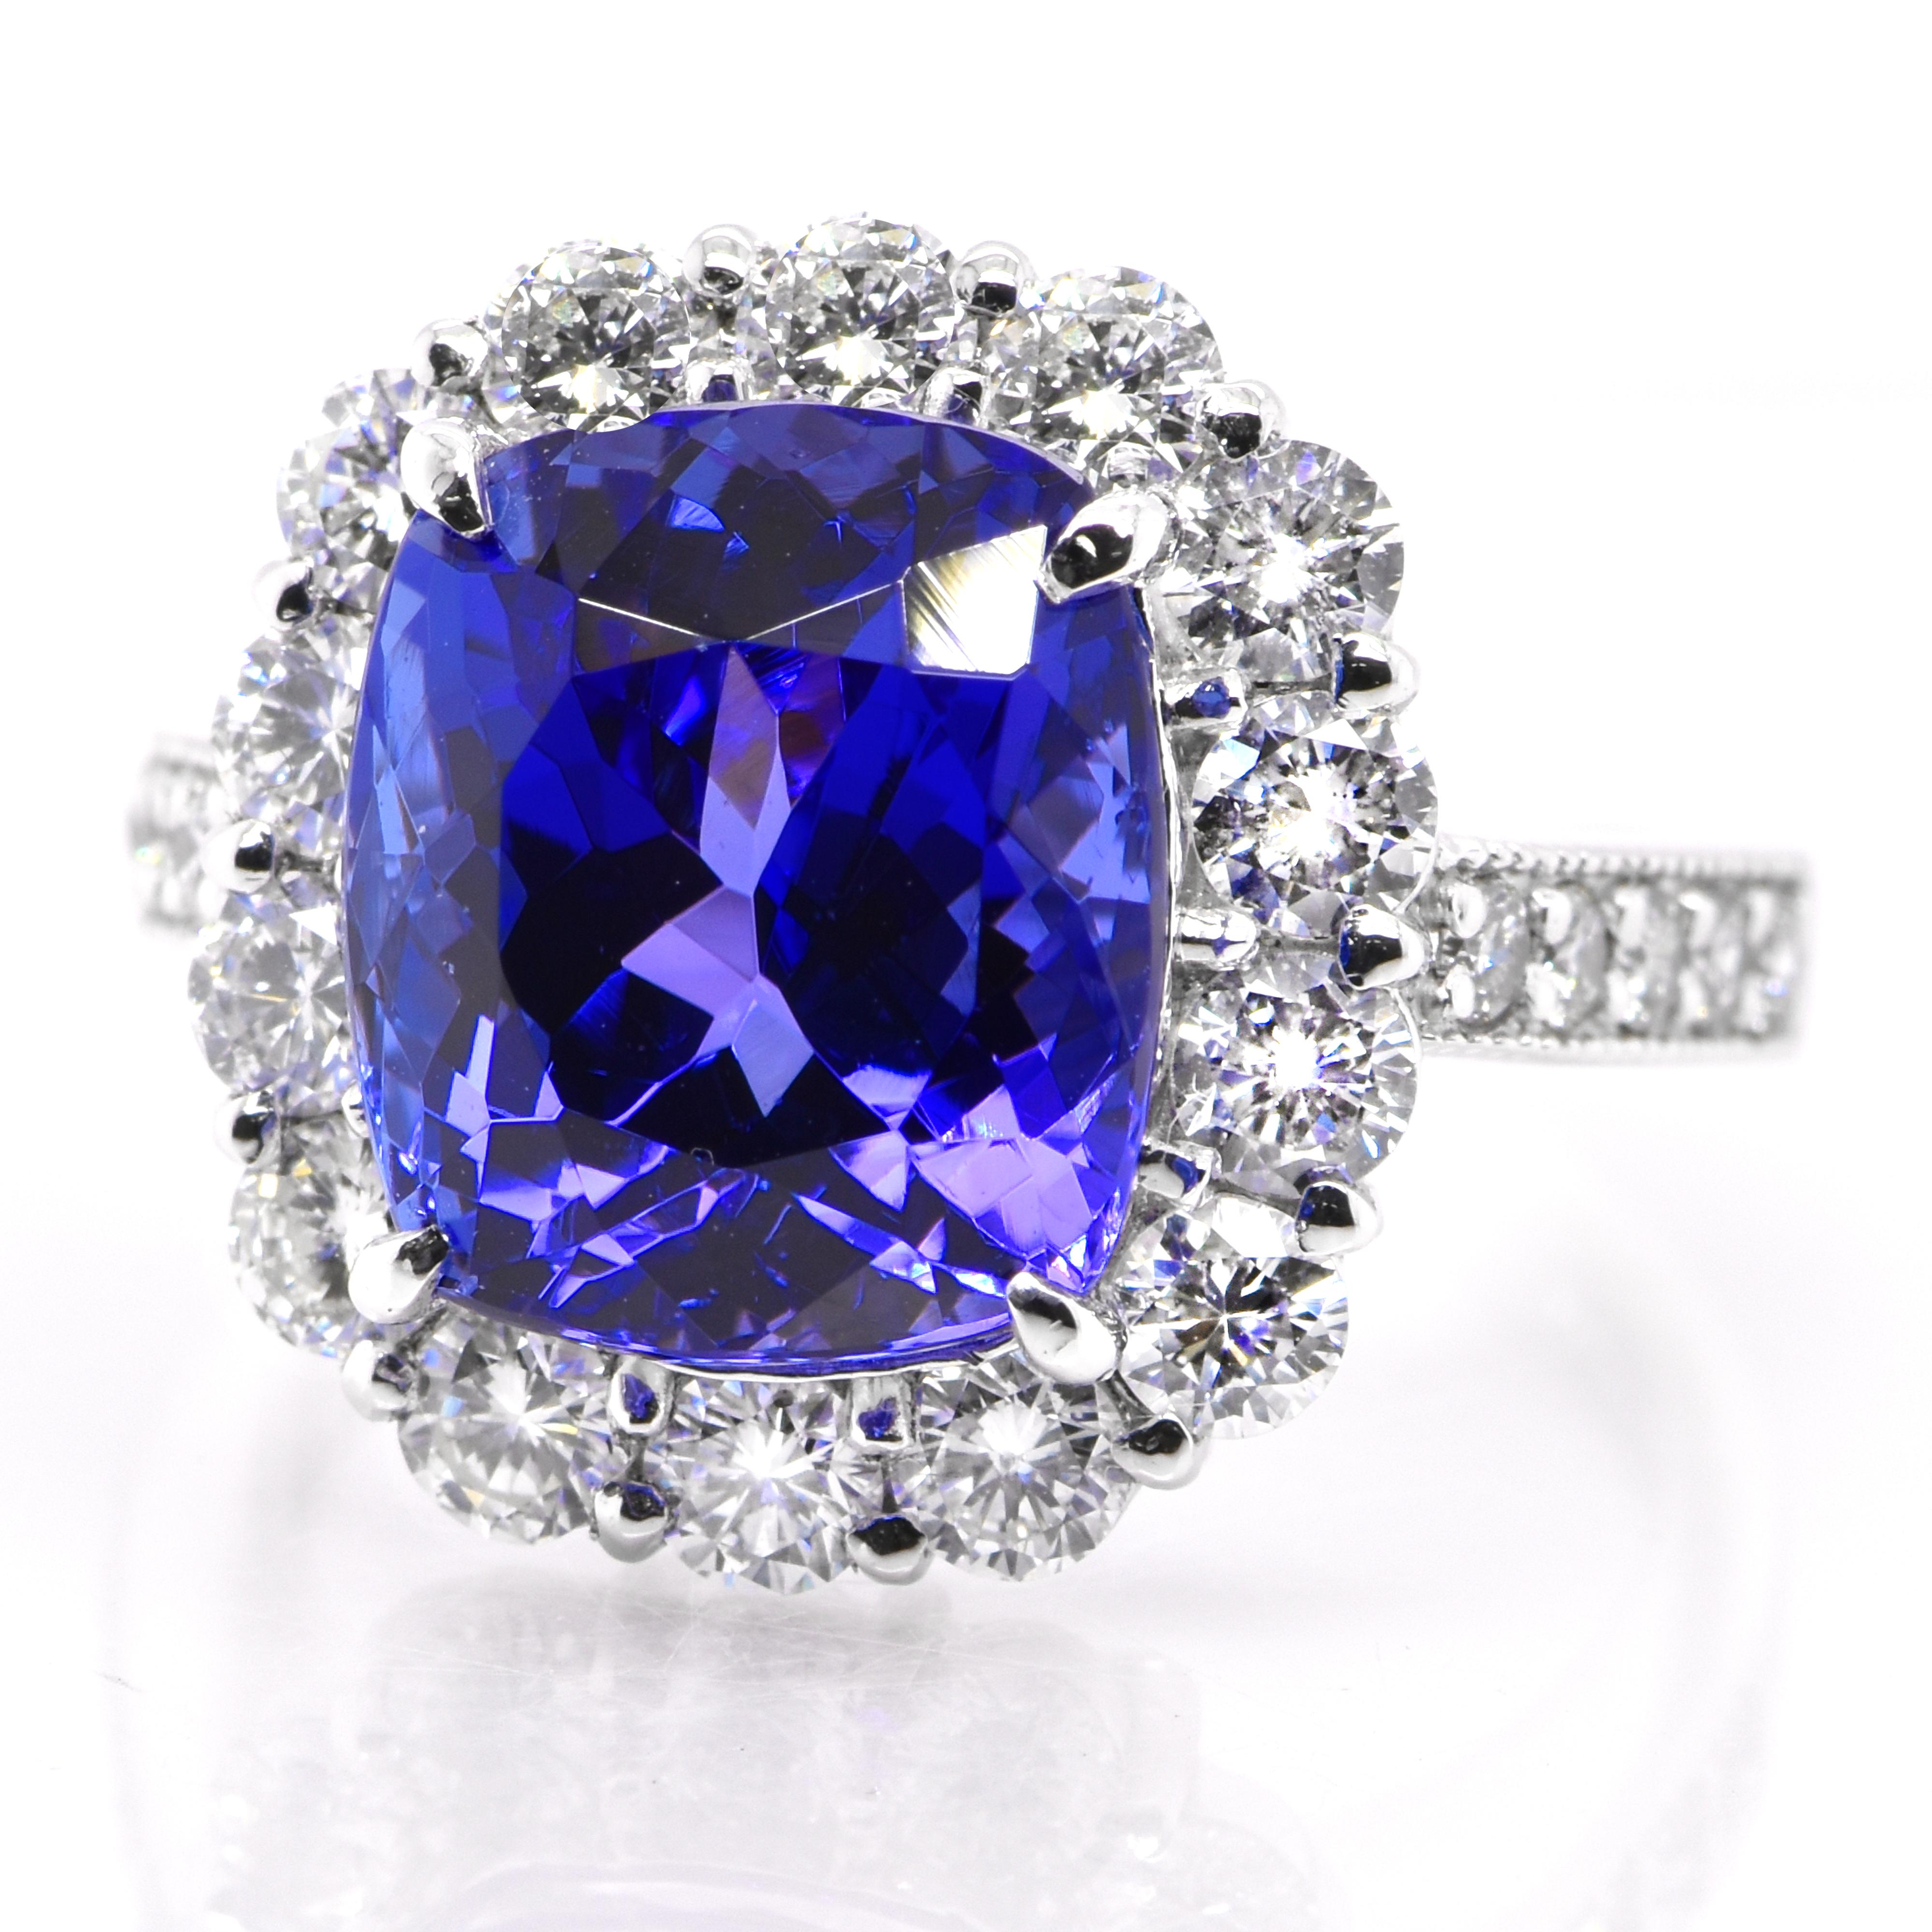 A beautiful ring featuring a 6.94 Carat Natural Tanzanite and 1.44 Carats Diamond Accents set in Platinum. Tanzanite's name was given by Tiffany and Co after its only known source: Tanzania. Tanzanite displays beautiful pleochroic colors meaning